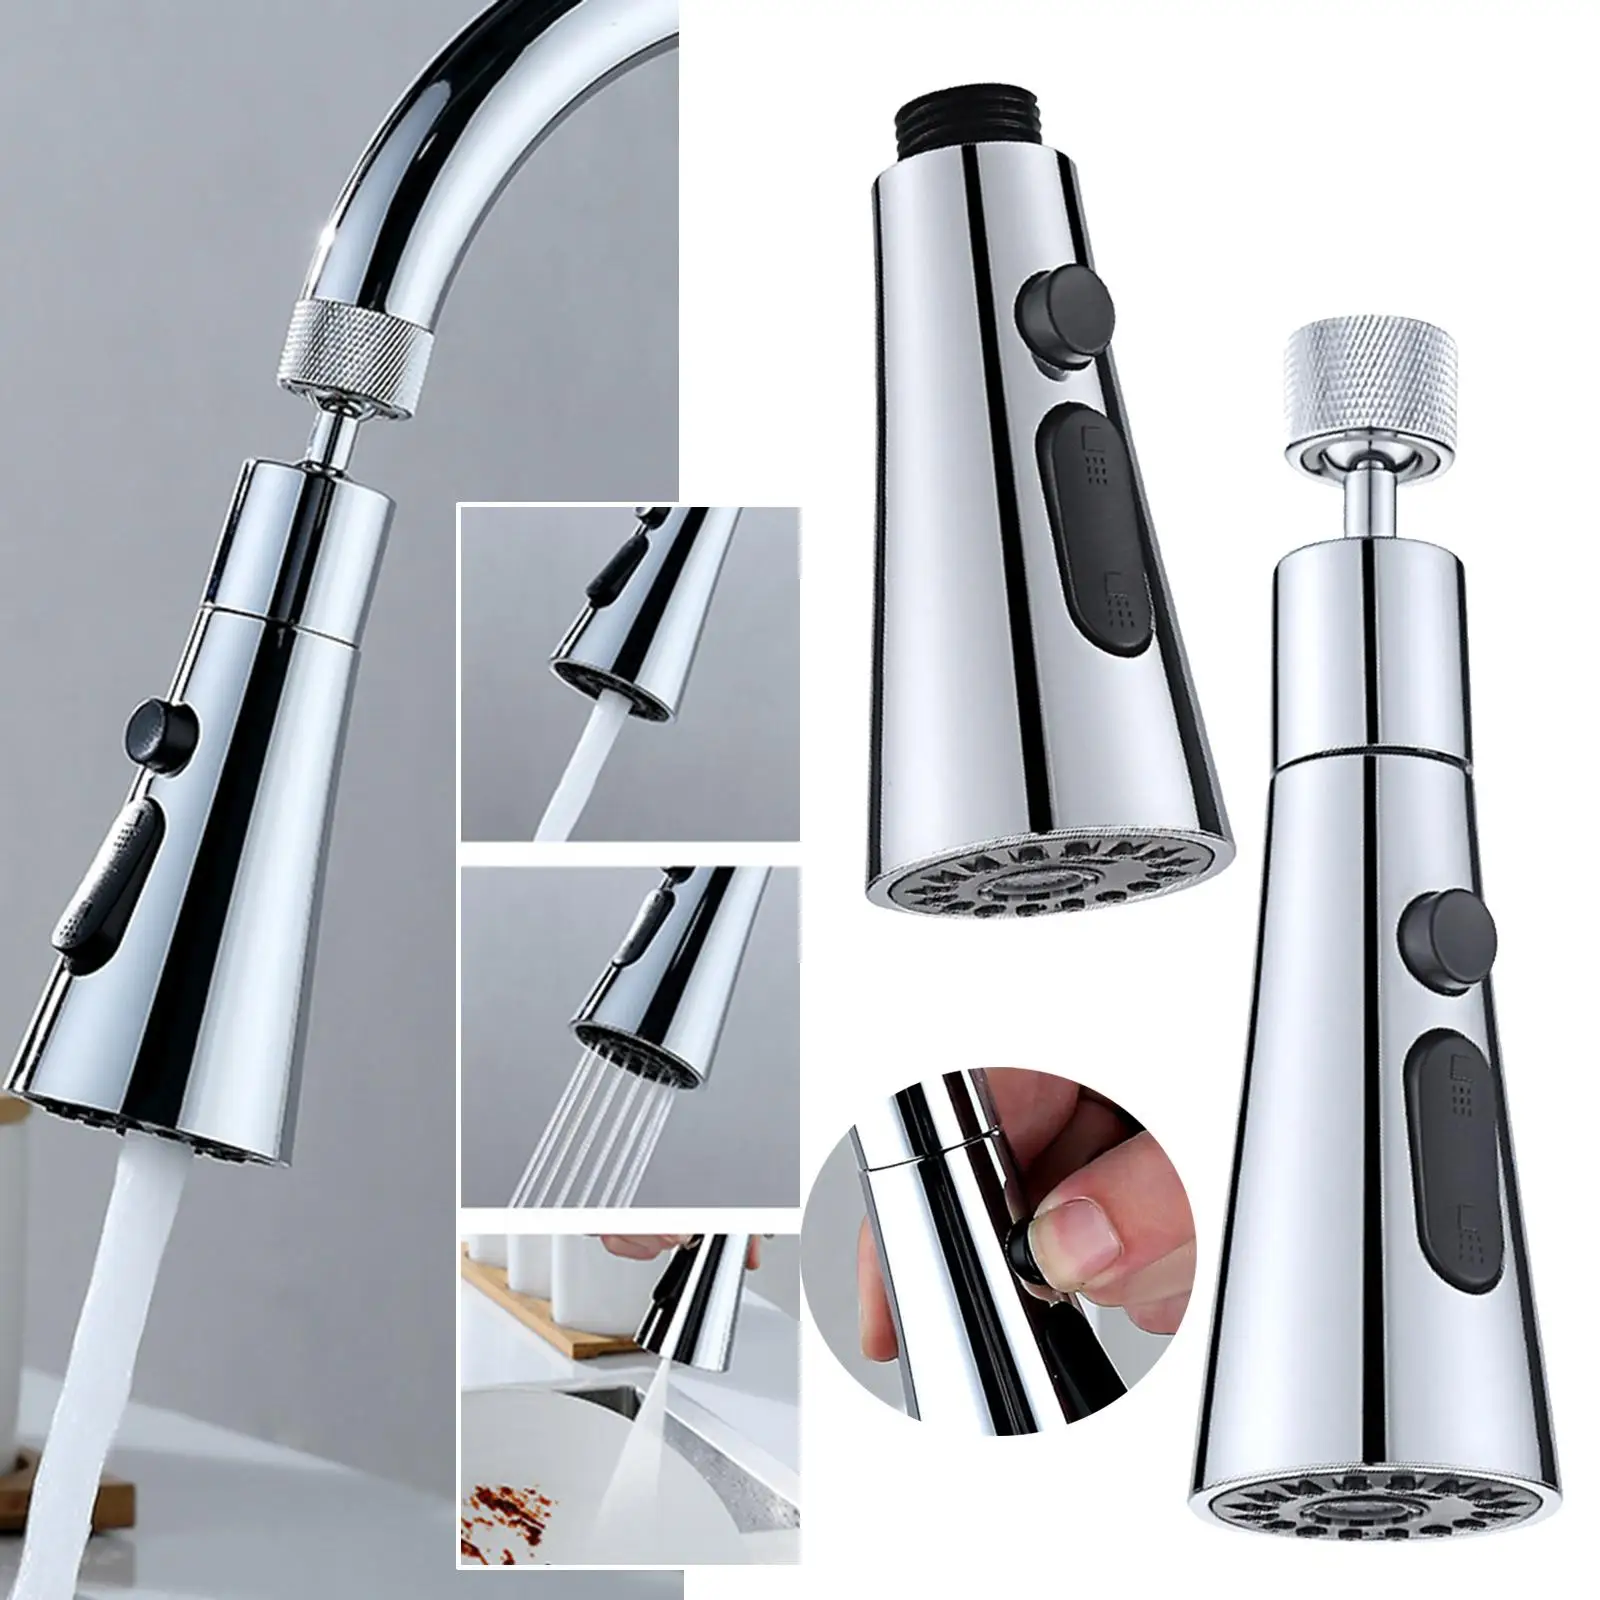 Rotatable Faucet Sprayer Attachment Faucet Aerator Kitchen Sink Accessories Kitchen Sink Faucet for Restaurant Kitchen Home